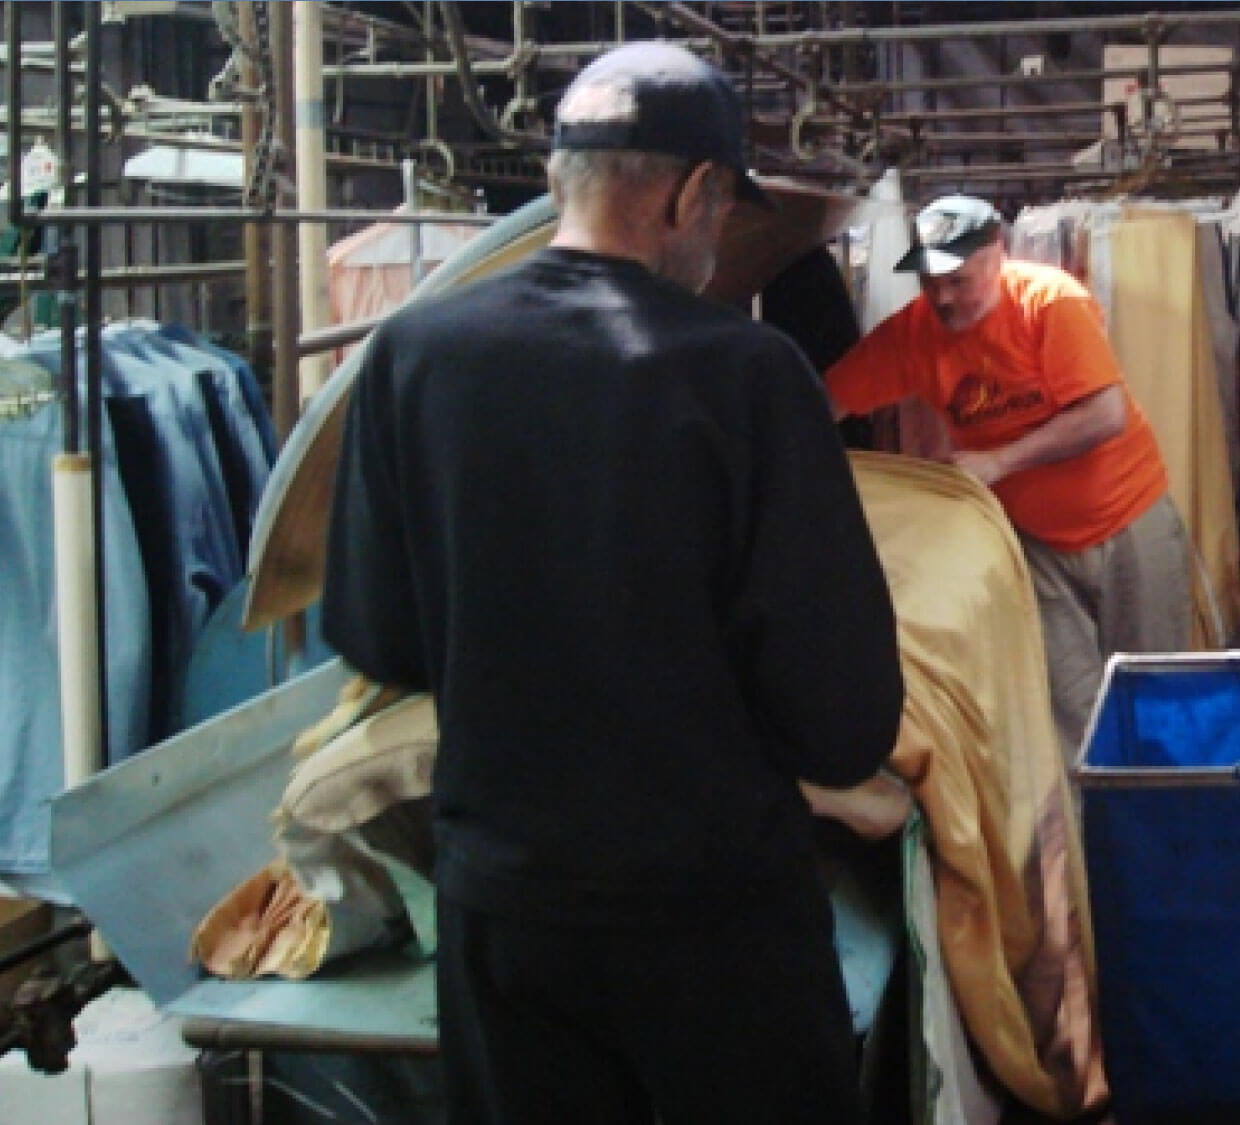 People's Cleaners Clothing Restoration and Repair: Norristown, PA